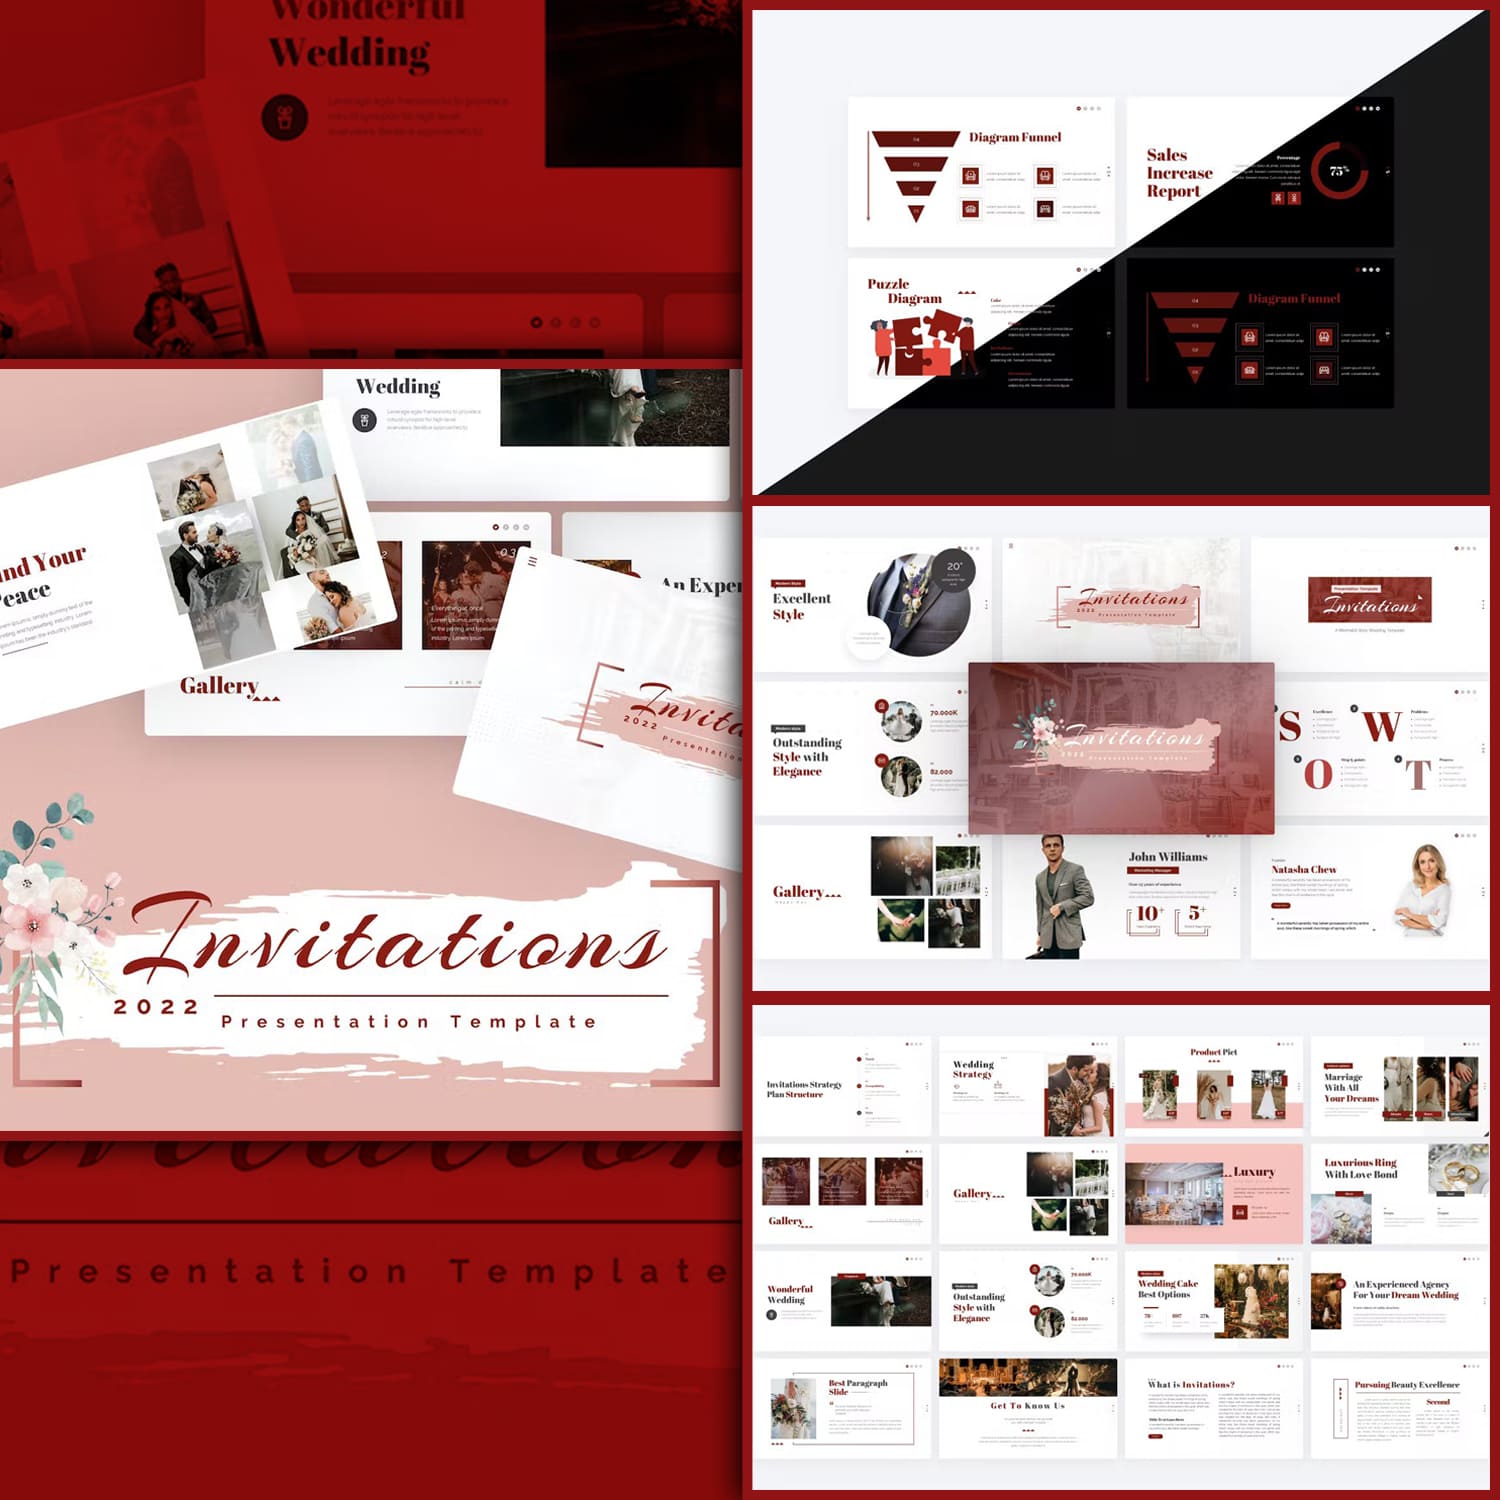 Wedding strategy on the Invitations presentation template.